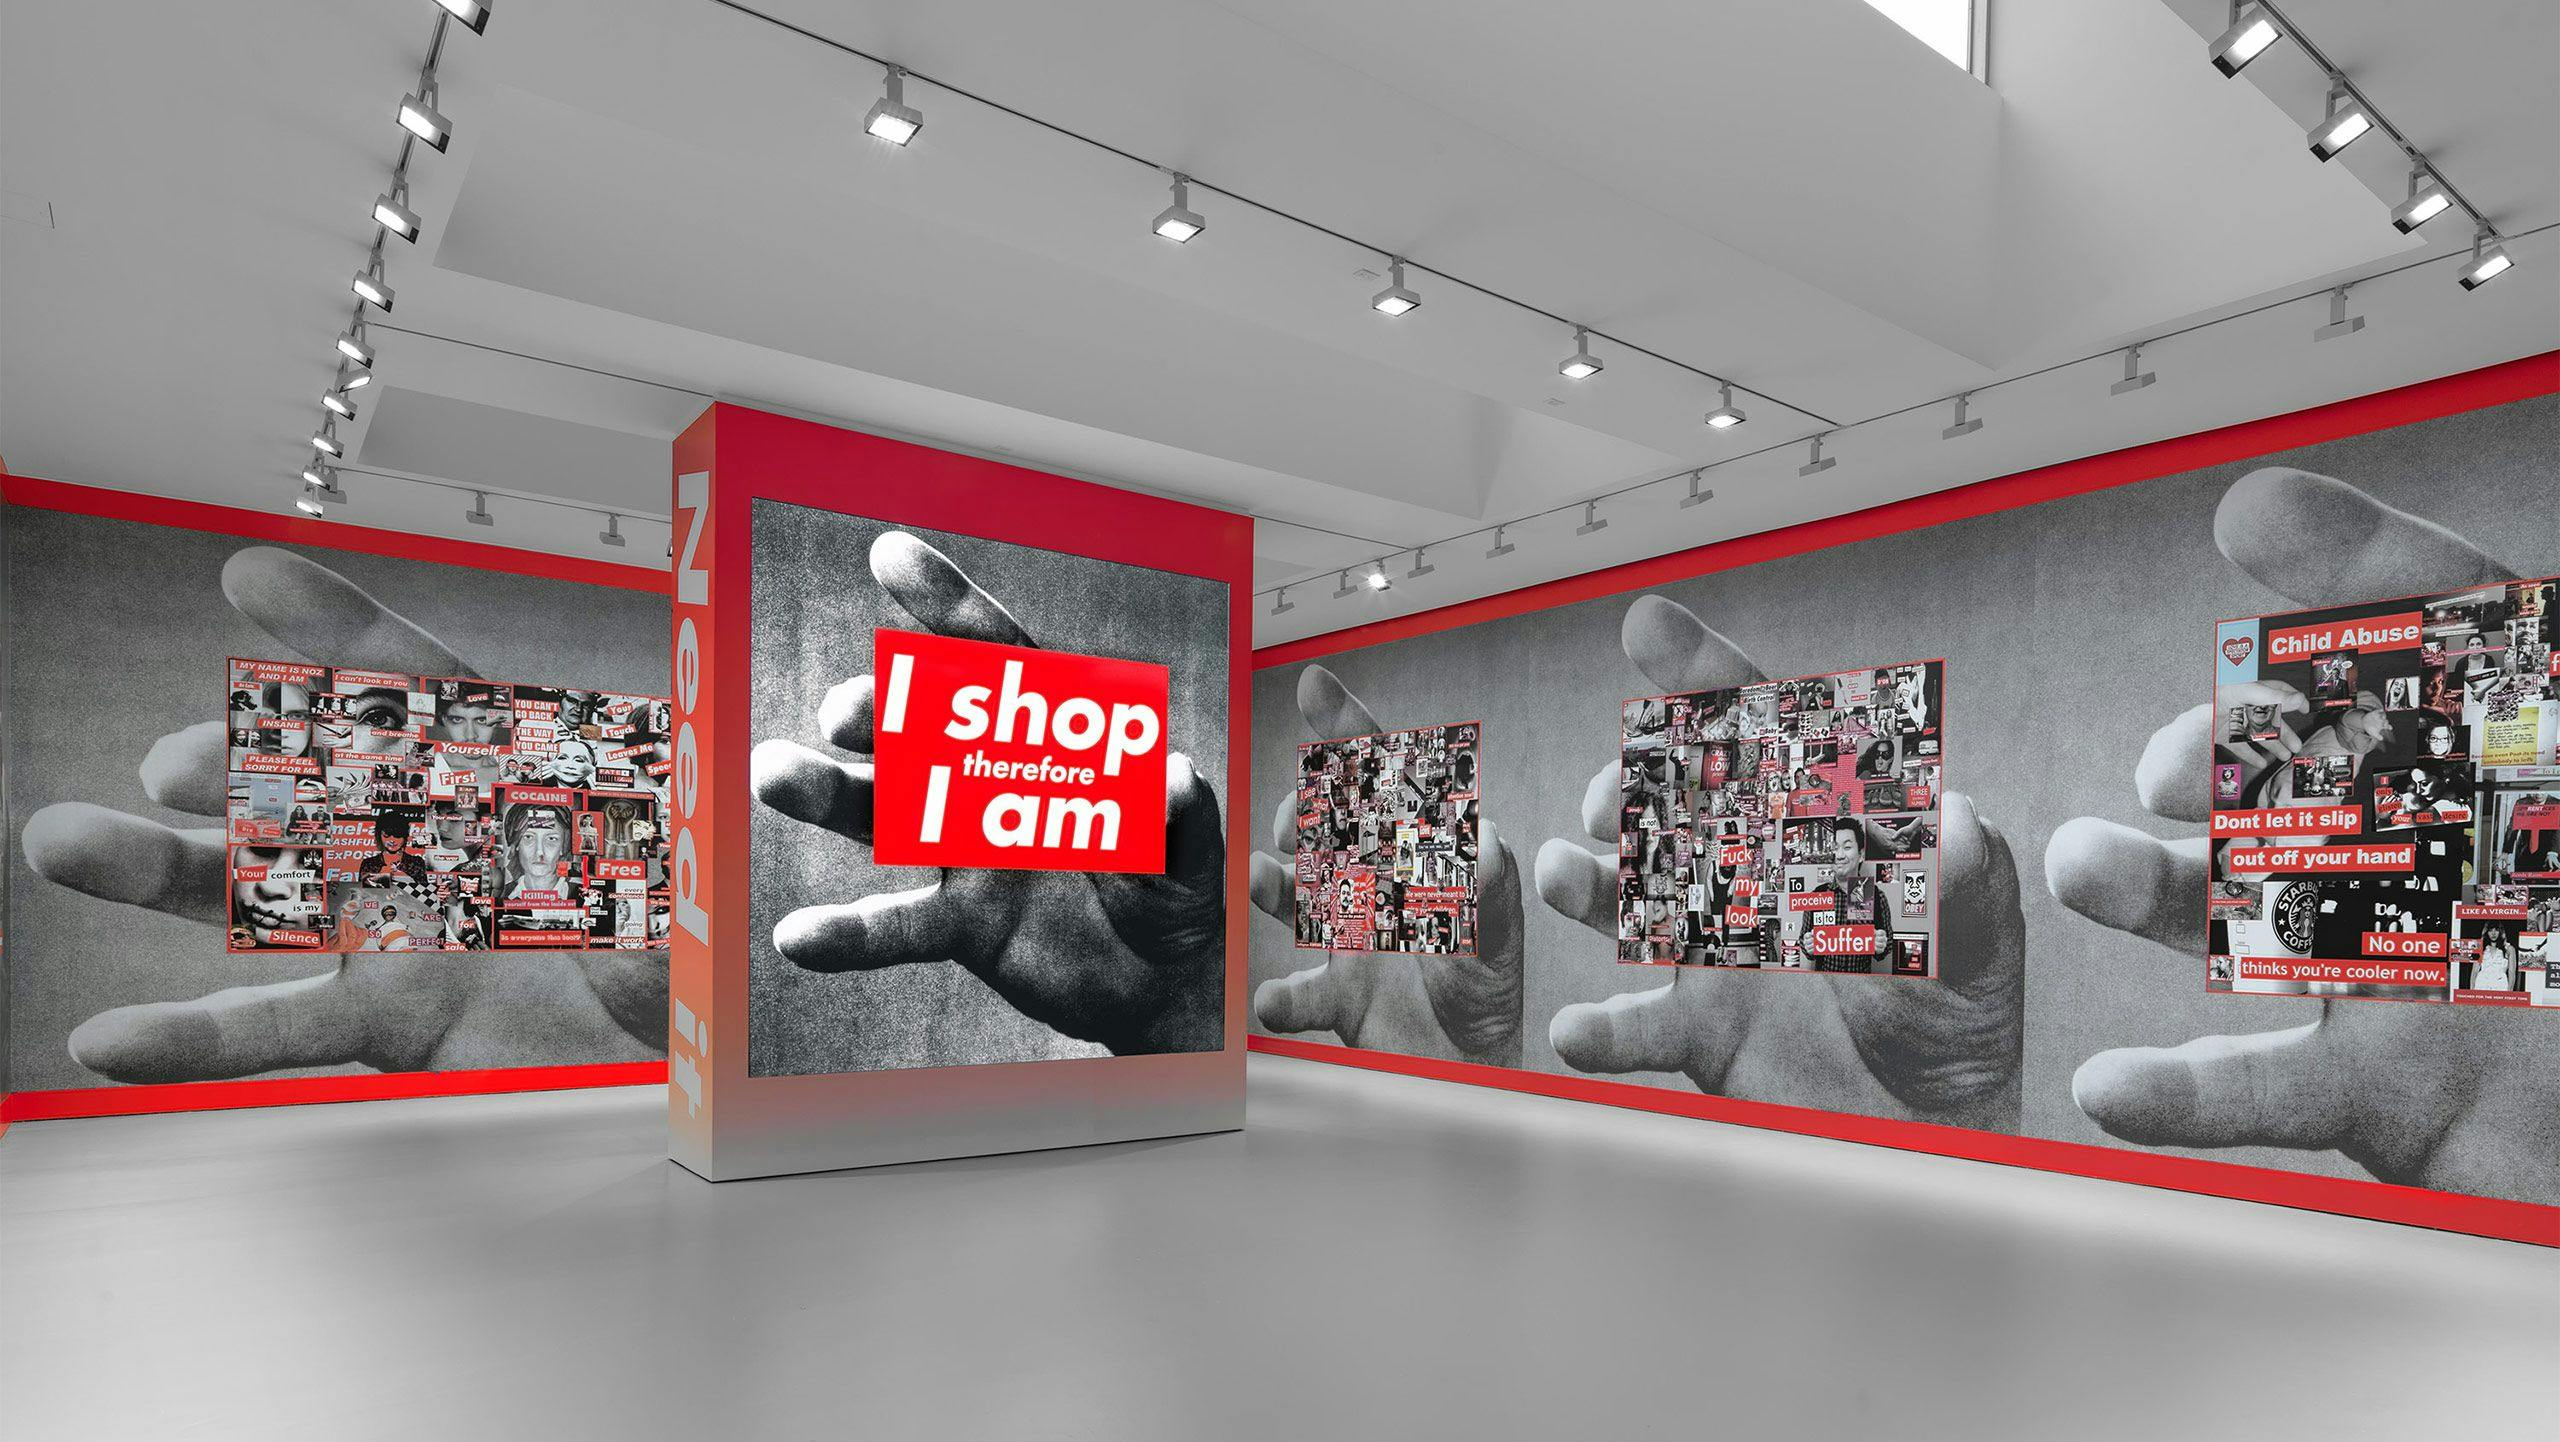 Installation view of the exhibition, Barbara Kruger, at David Zwirner in New York, dated 2022.